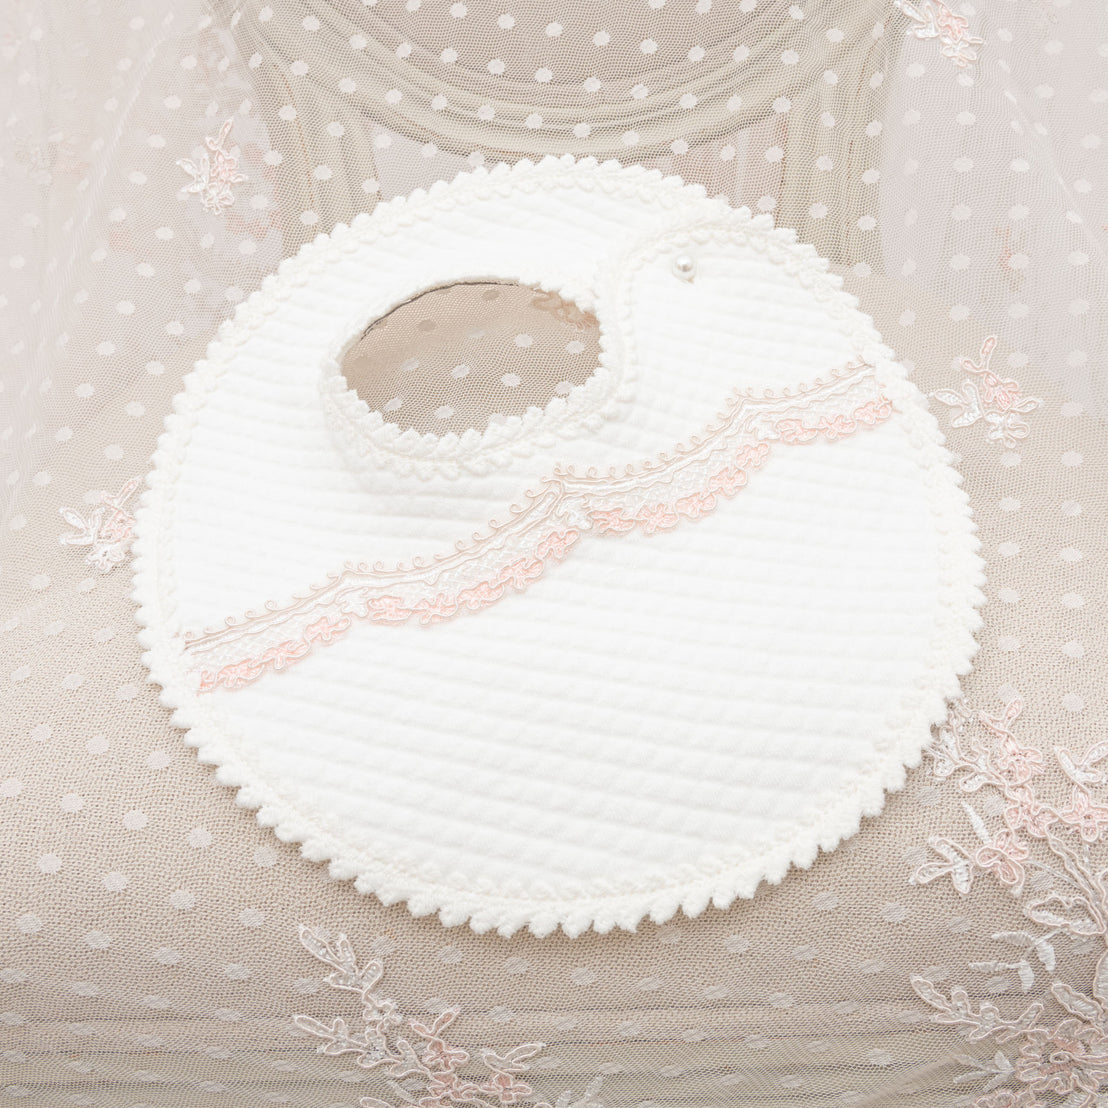 A white textured Elizabeth Bib with a pink embroidered design, displayed on a sheer fabric with floral details for christening or baptism. The bib features a snap button closure near the neckline. 